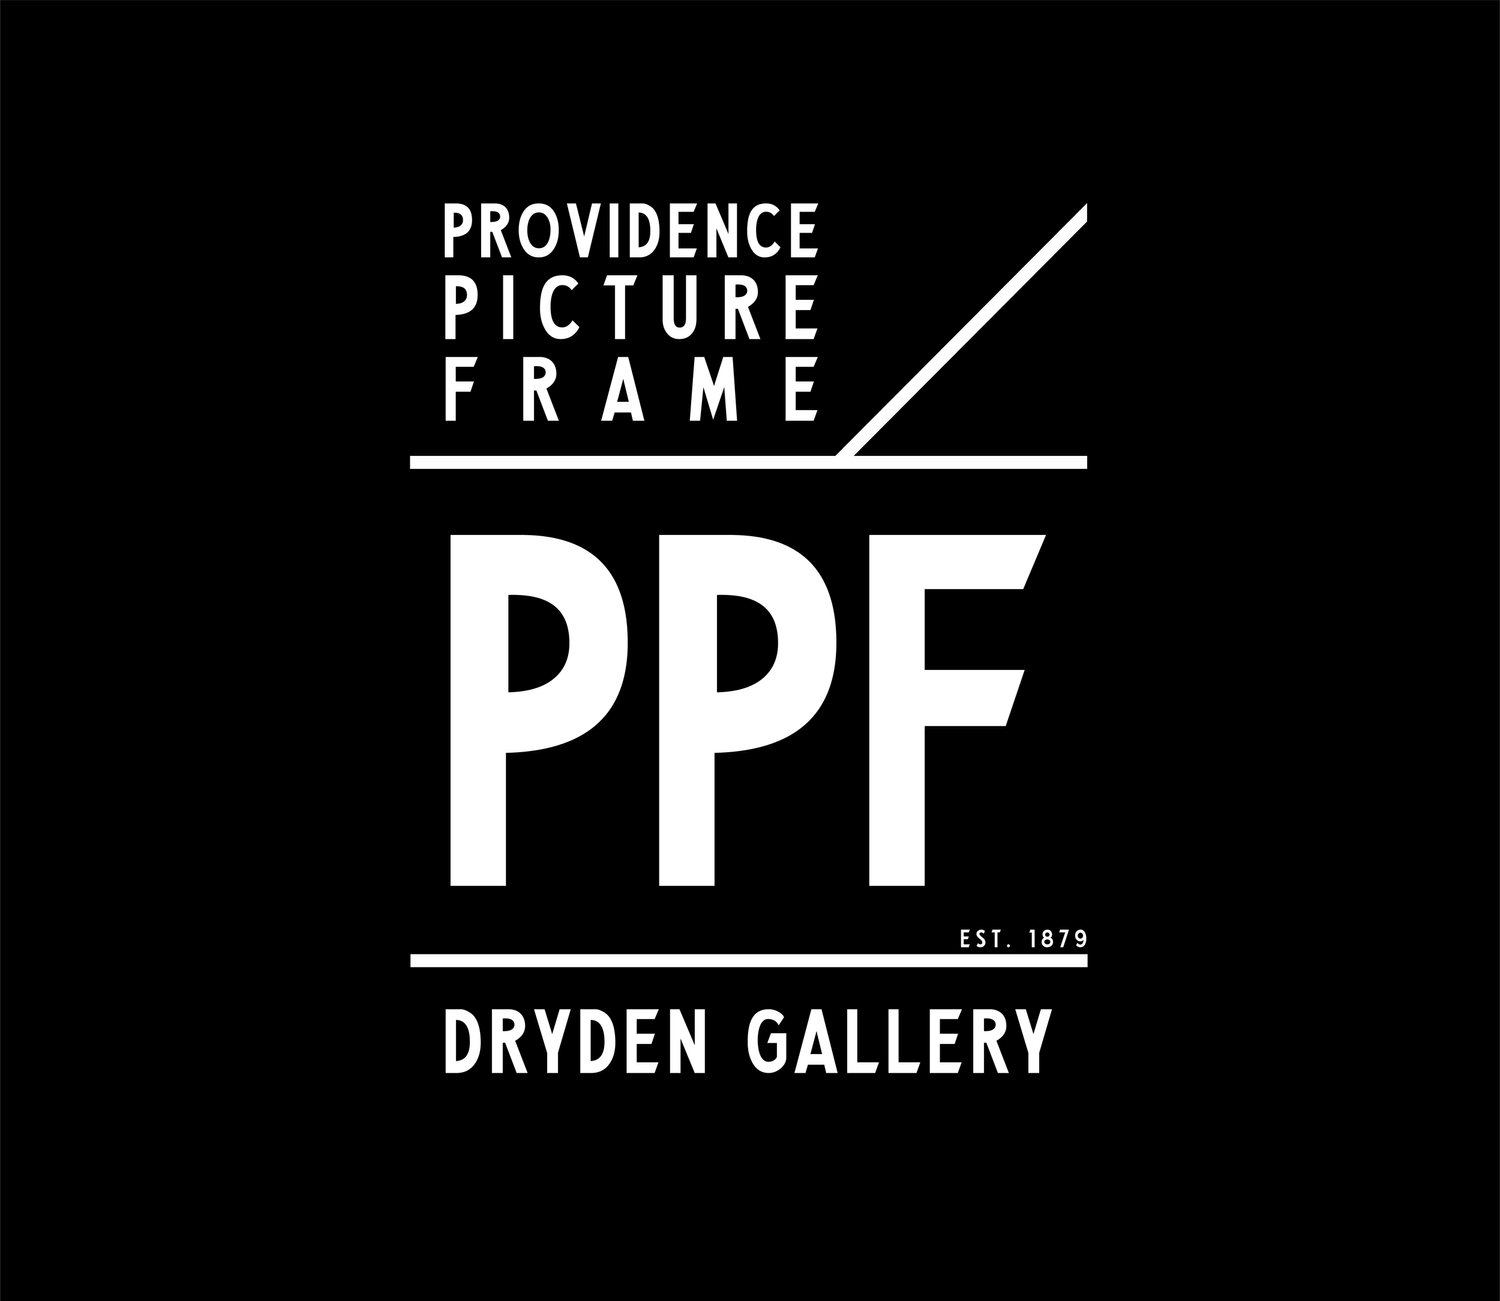 Providence Picture Frame &amp; Dryden Gallery